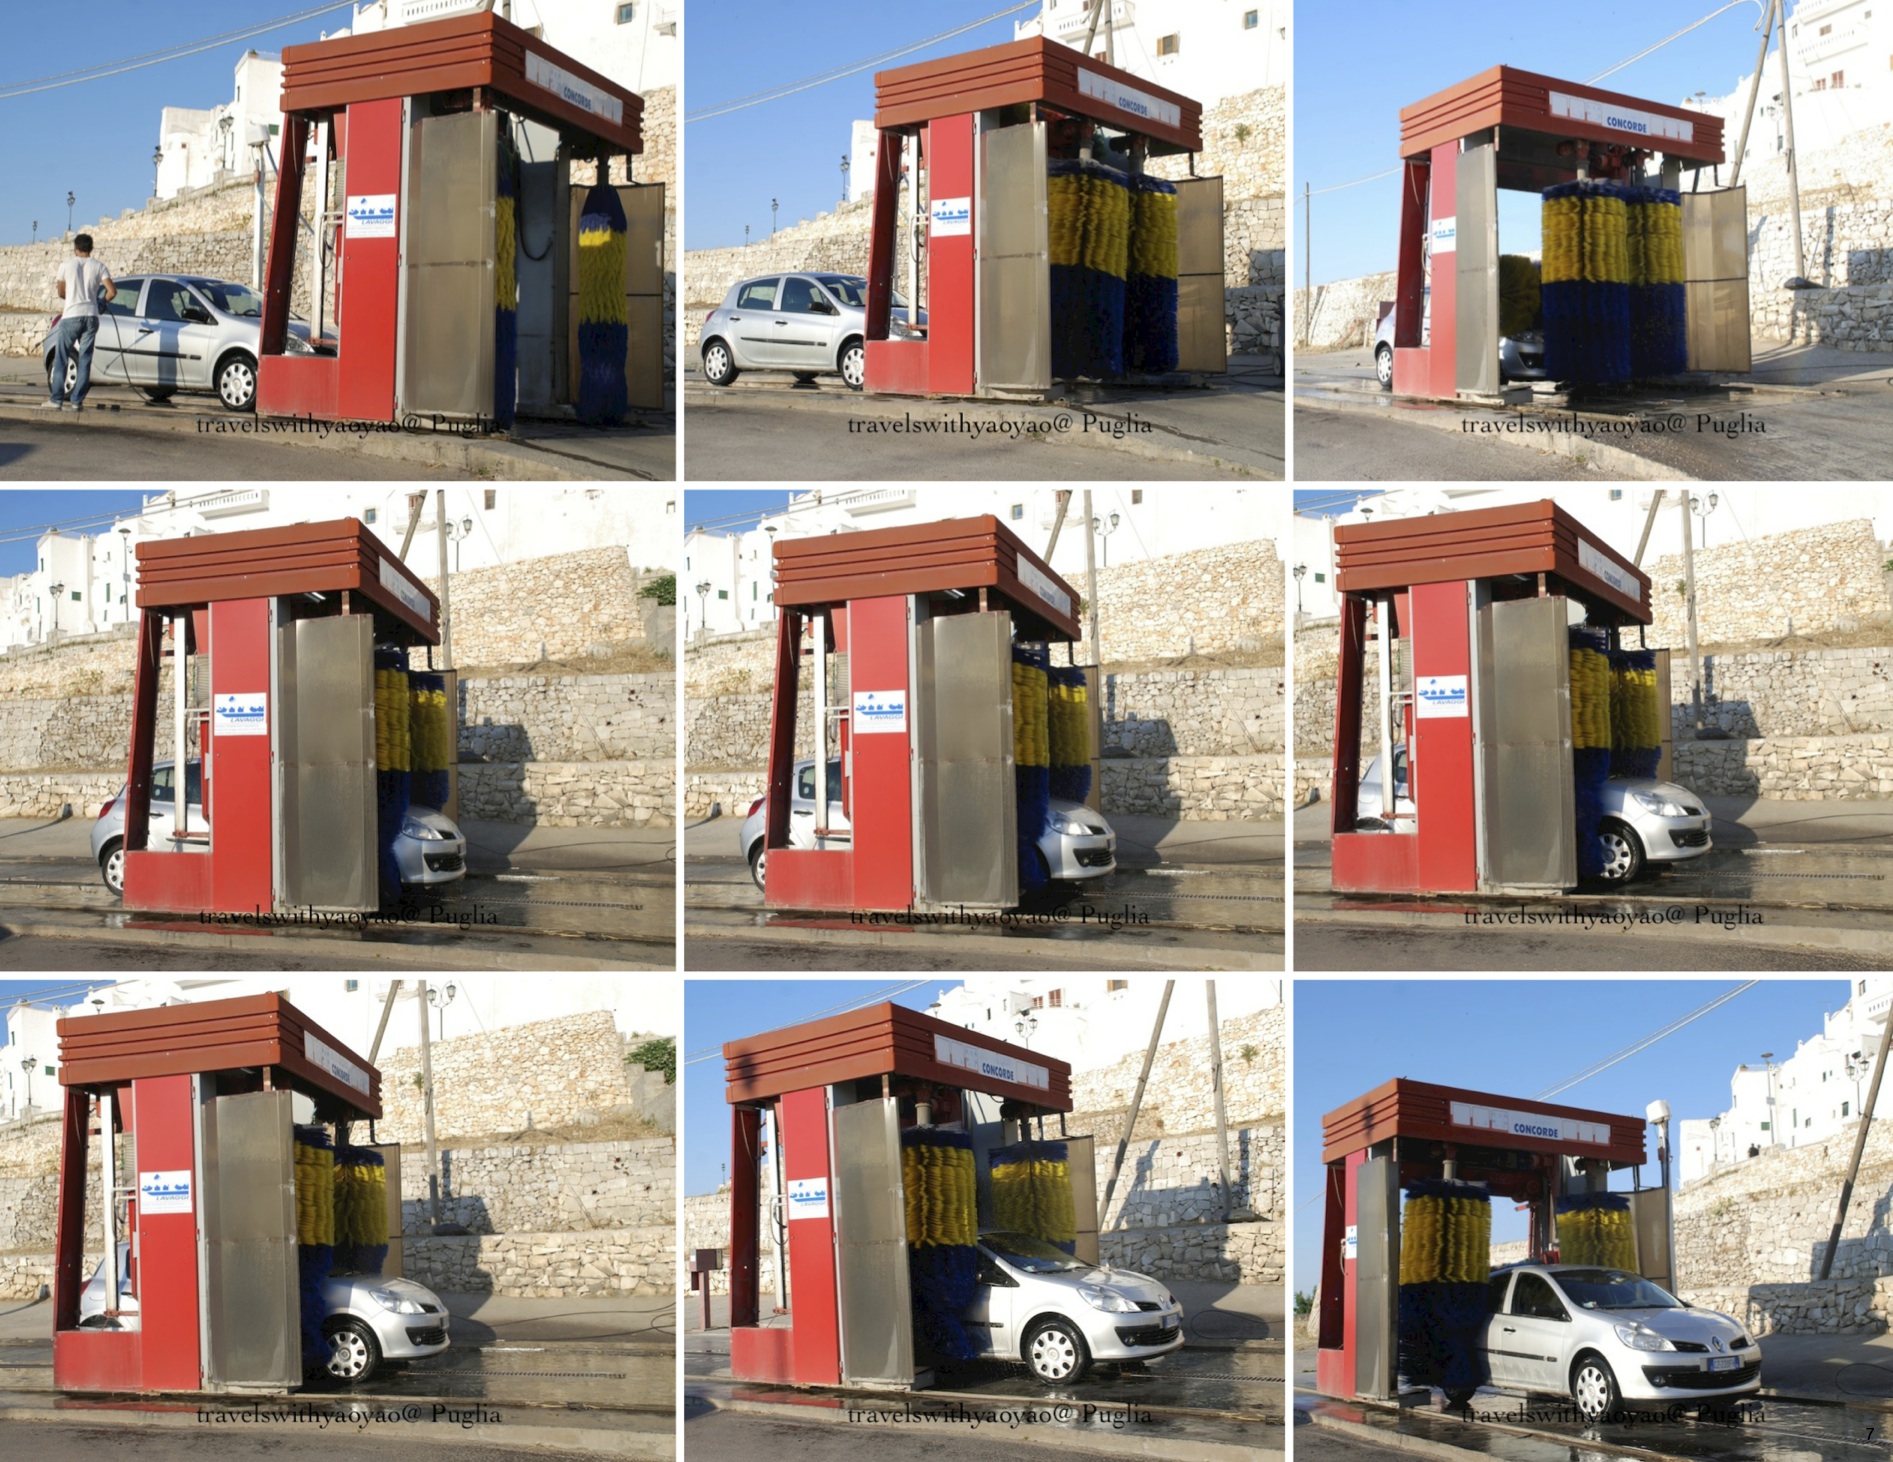 Italy: World's Smallest Carwash